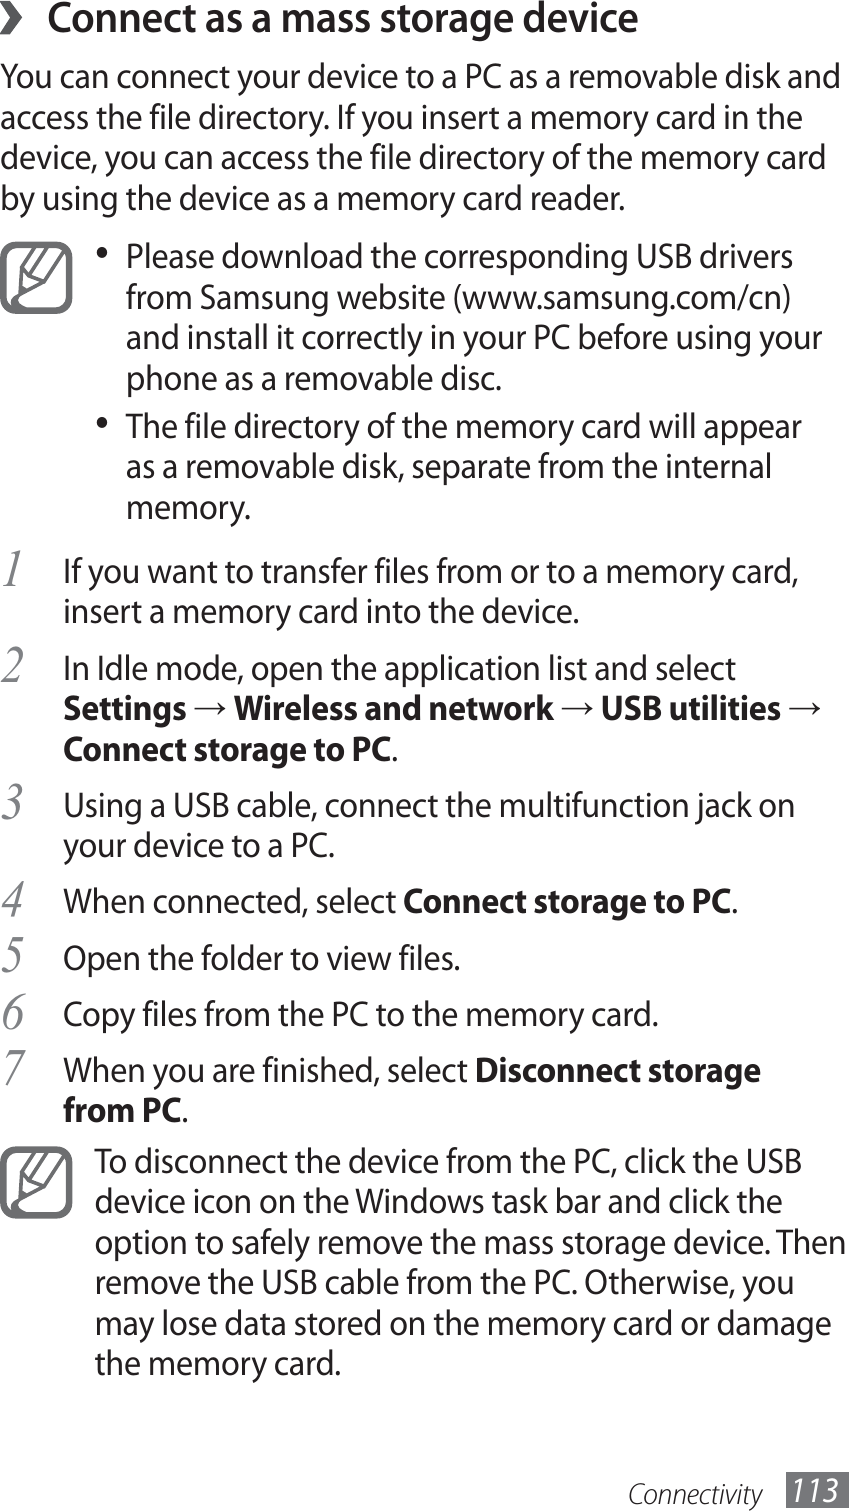 Connectivity 113 ›Connect as a mass storage deviceYou can connect your device to a PC as a removable disk and access the file directory. If you insert a memory card in the device, you can access the file directory of the memory card by using the device as a memory card reader.Please download the corresponding USB drivers • from Samsung website (www.samsung.com/cn) and install it correctly in your PC before using your phone as a removable disc.The file directory of the memory card will appear • as a removable disk, separate from the internal memory.If you want to transfer files from or to a memory card, 1 insert a memory card into the device.In Idle mode, open the application list and select 2 Settings → Wireless and network → USB utilities → Connect storage to PC.Using a USB cable, connect the multifunction jack on 3 your device to a PC.When connected, select 4 Connect storage to PC.Open the folder to view files.5 Copy files from the PC to the memory card.6 When you are finished, select 7 Disconnect storage from PC.To disconnect the device from the PC, click the USB device icon on the Windows task bar and click the option to safely remove the mass storage device. Then remove the USB cable from the PC. Otherwise, you may lose data stored on the memory card or damage the memory card.